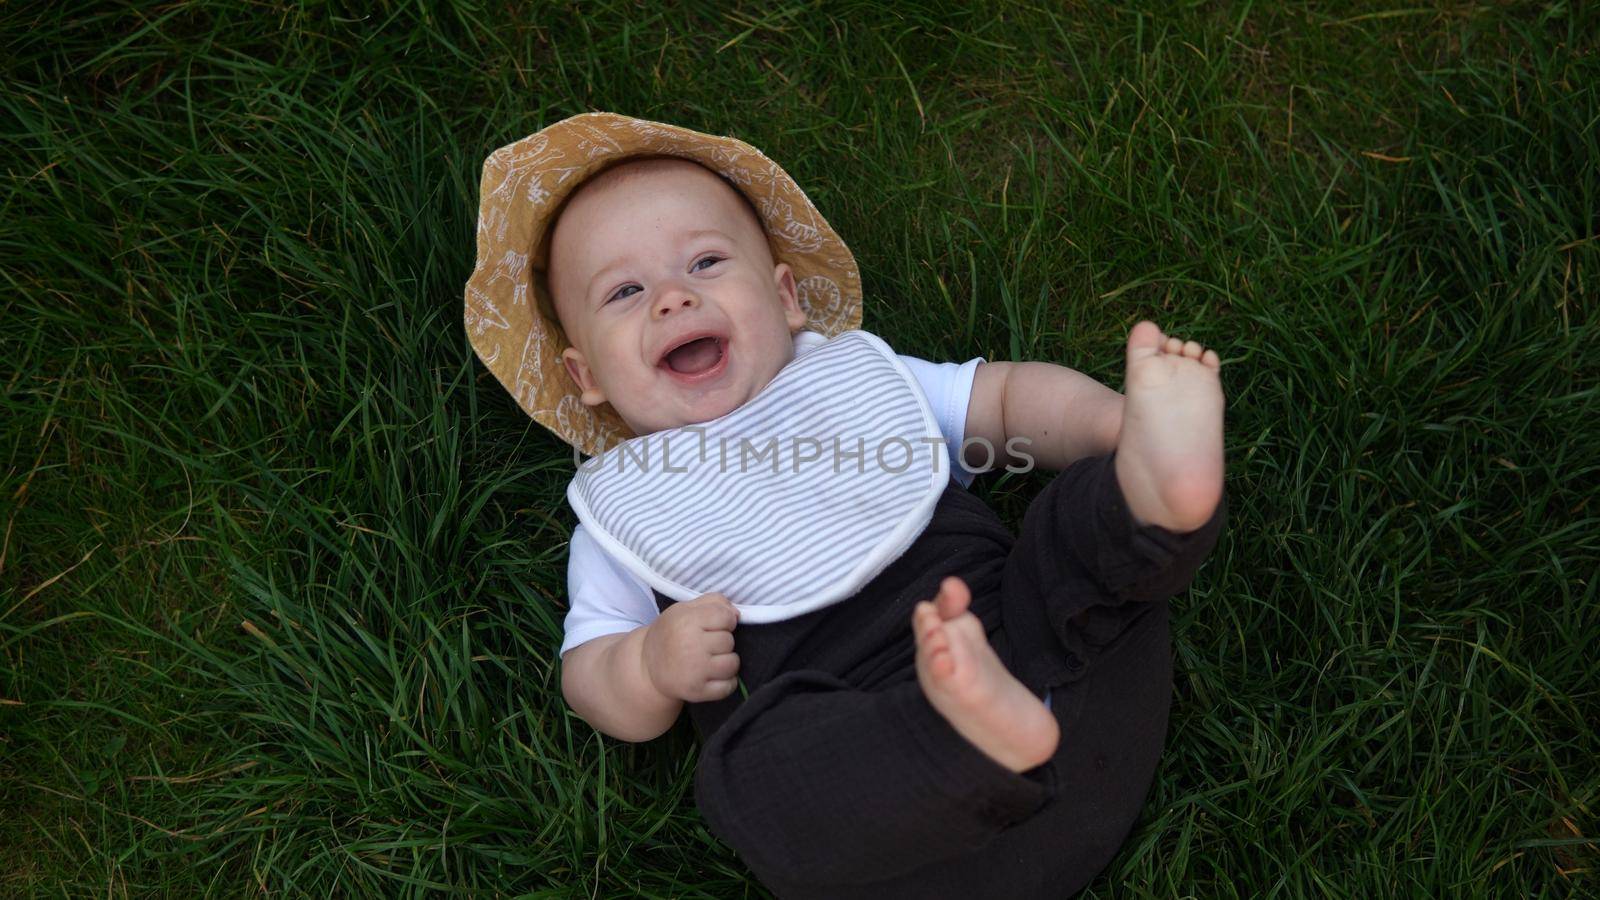 Small Happy Newborn child in summer panama hat Fall down laying on grass barefoot in Summer Sunny Day. Infant Kid Toddler Boy Smilling Face look at camera in Garden ouside Family Childhood Nature